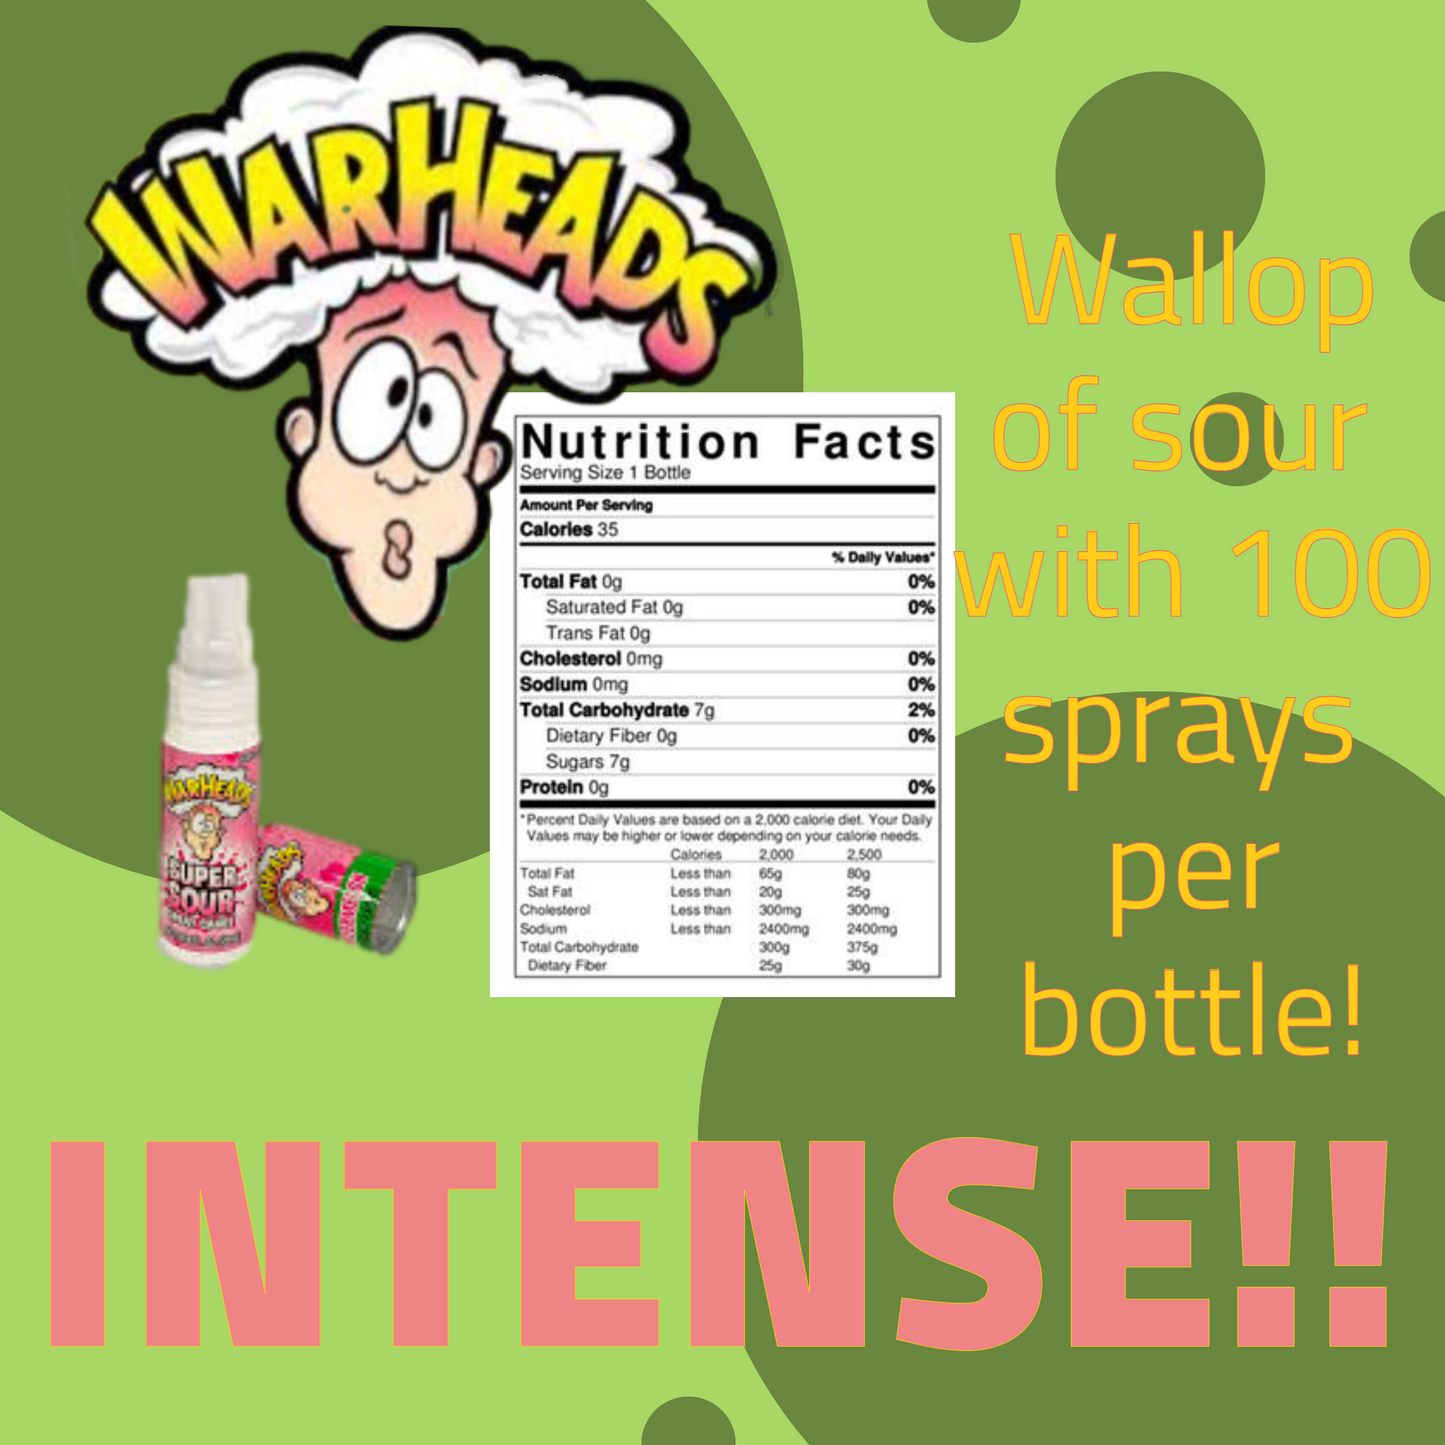 WARHEADS EXTREME SOUR SPRAY AND DROPS BUNDLE Warheads Super Sour Spray Candy 0.68 Oz Each And Double Drops Liquid Sour Candy 1 Oz Each Assorted Fruit Flavors (6 Pack)